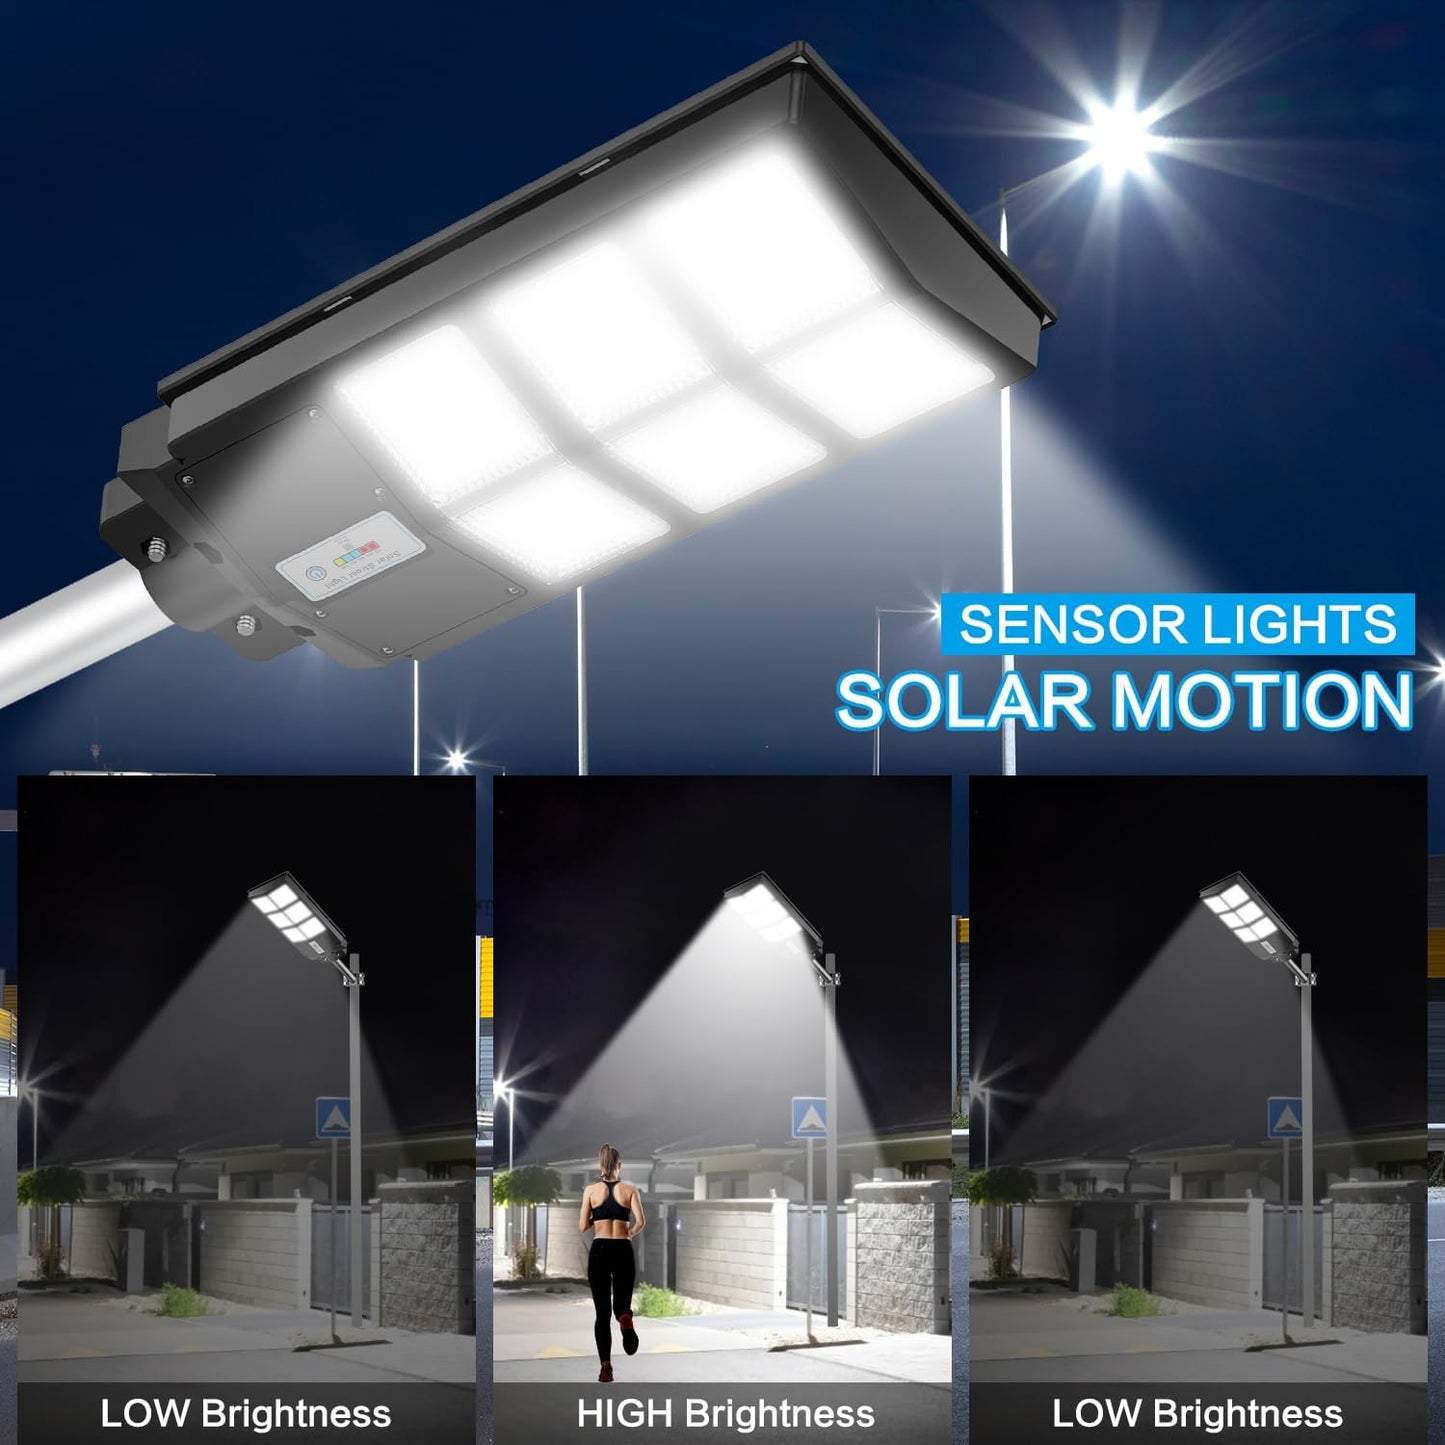 VOOJOY 600W Solar Street Lights Outdoor Waterproof, 30000 Lumens High Brightness Dusk to Dawn LED Solar Street Lamp with Motion Sensor and Remote Control for Yard, Garden, Patio